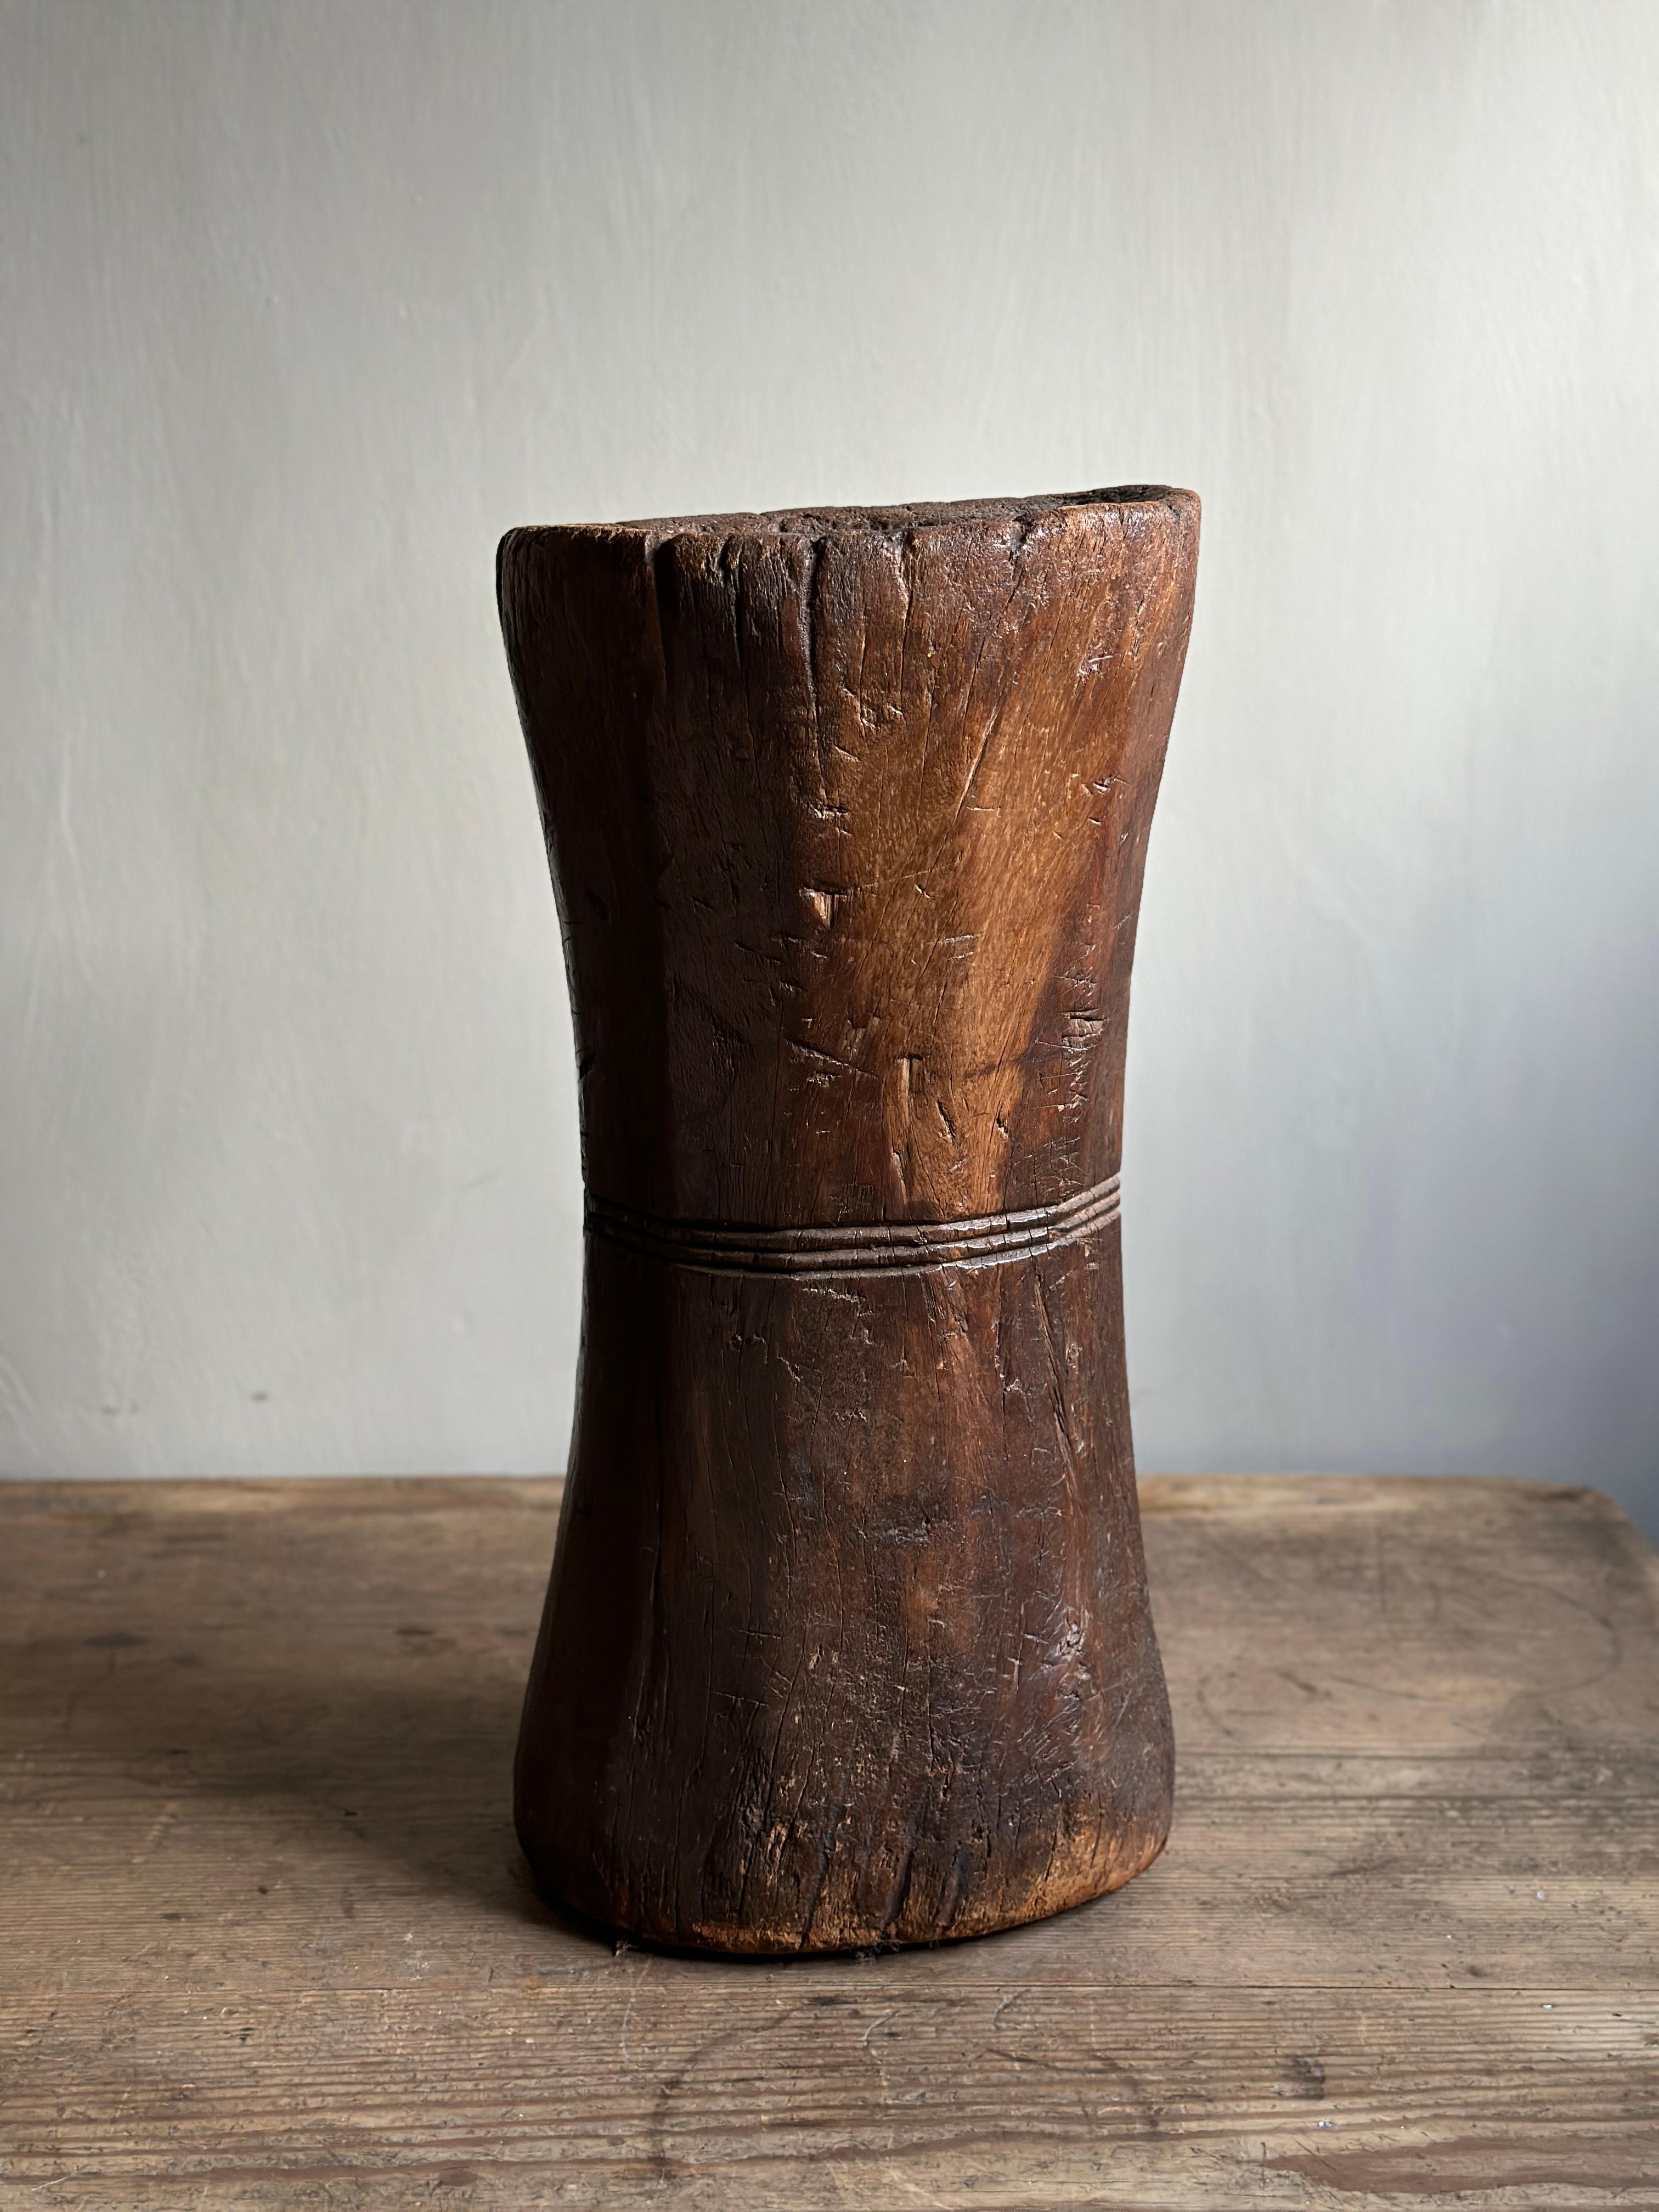 Beautiful Hand-Carved Wabi Sabi Mortar that works perfectly for a planter. By unknown designer in Africa, c. early 20th Century. 

Wear consistent with age and use showing wonderful patina. 